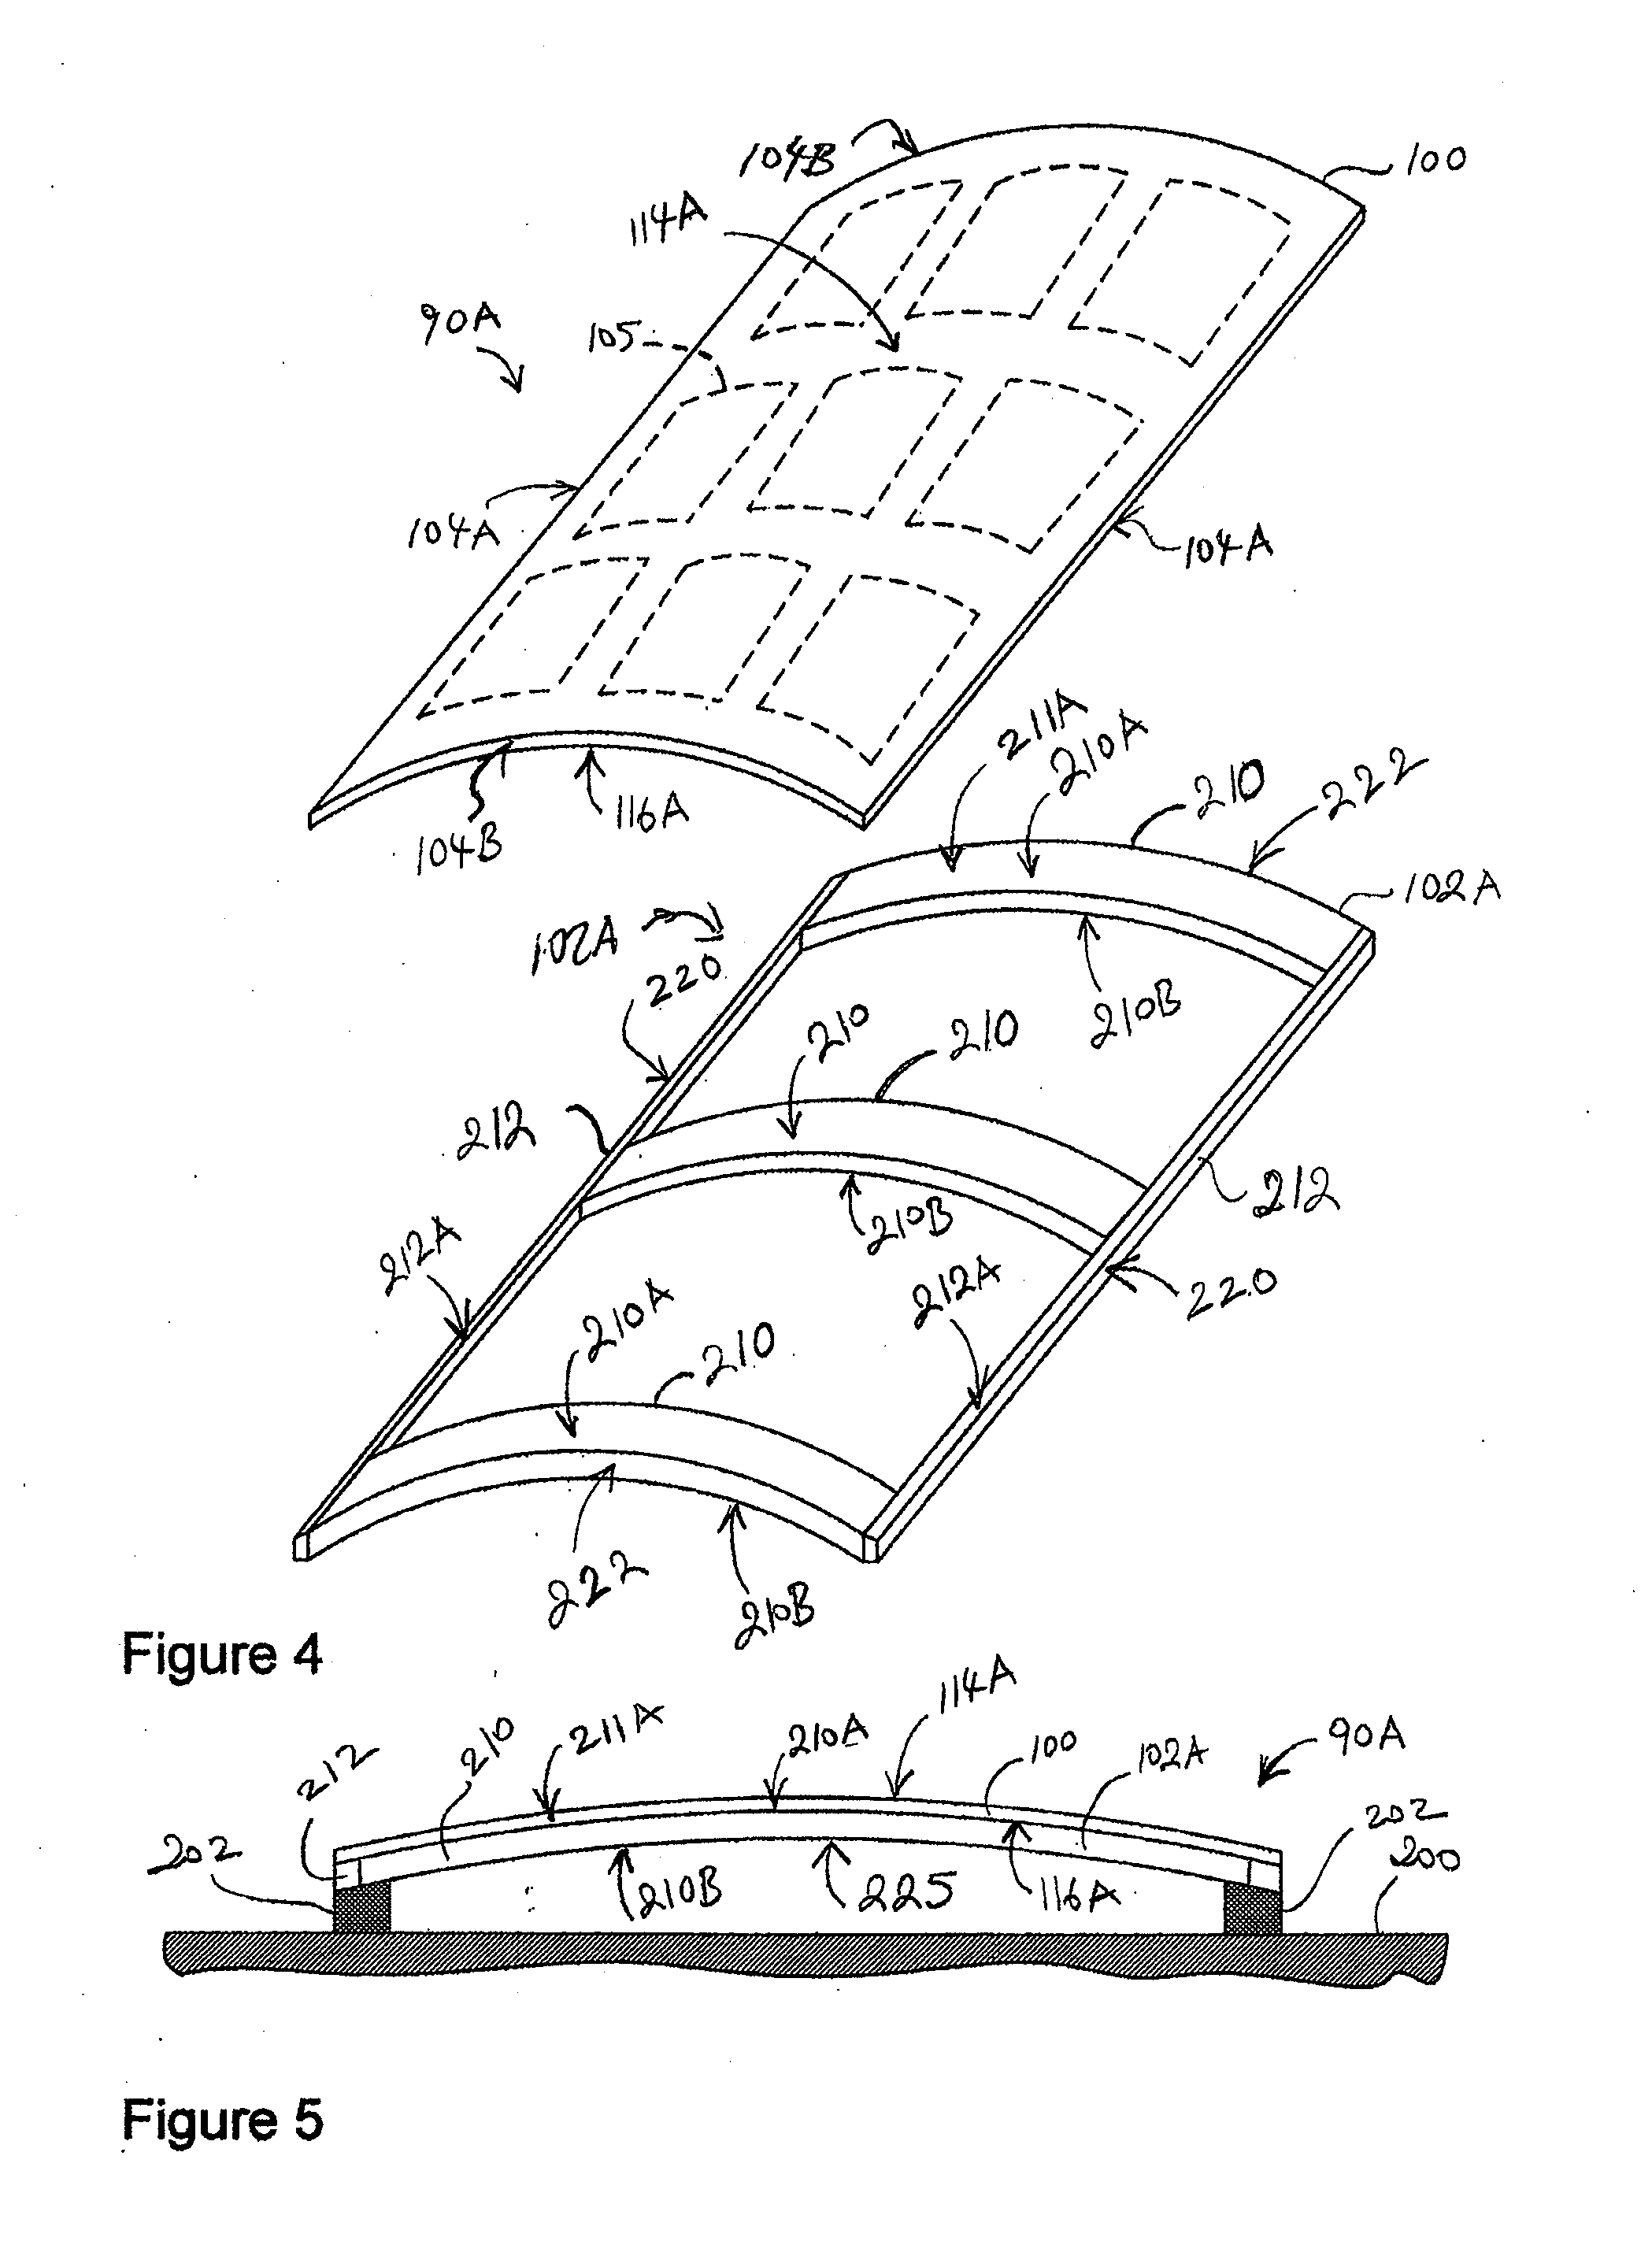 Integrated structural solar module and chassis